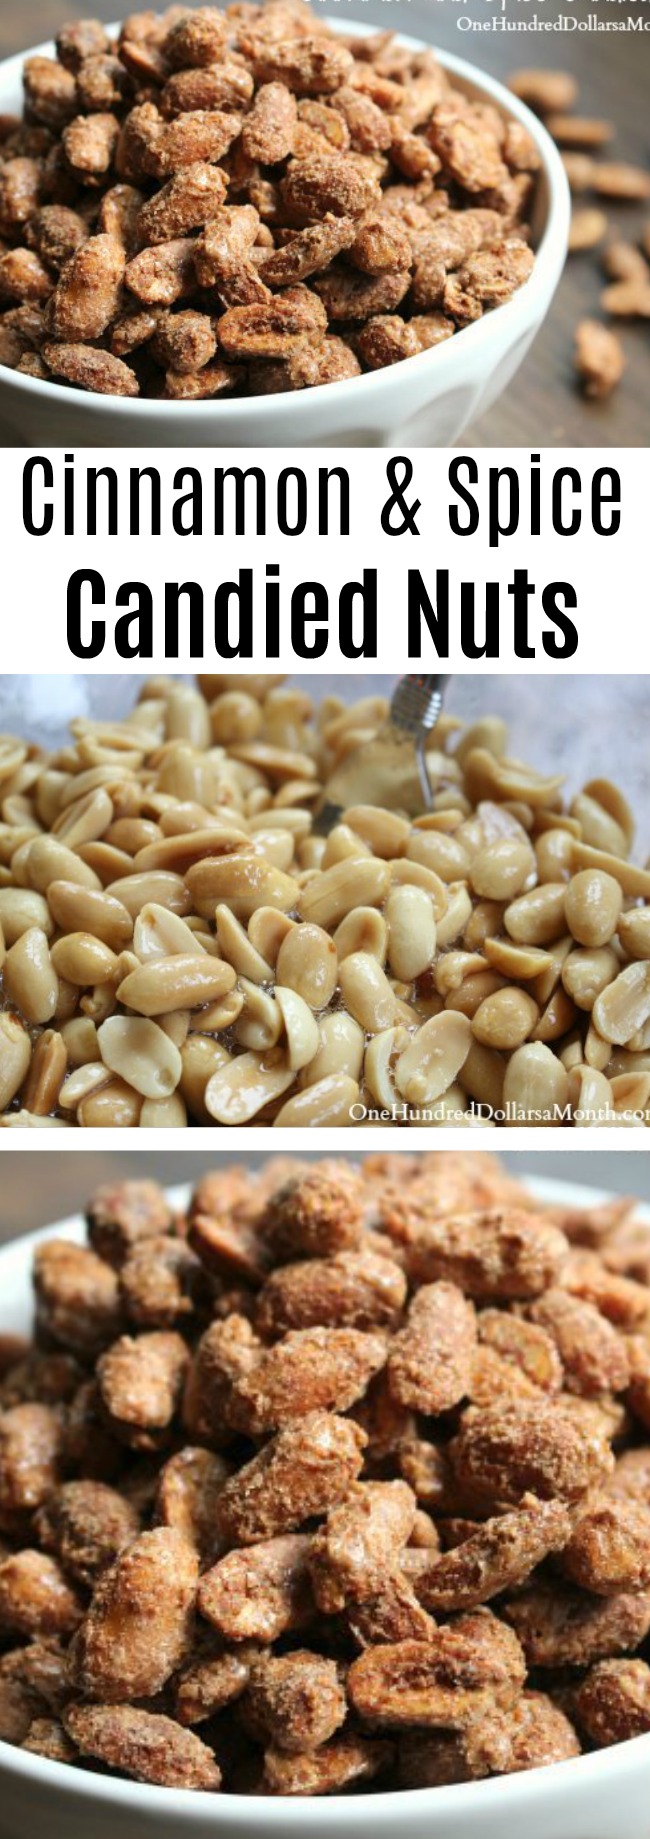 Cinnamon and Spice Candied Nuts